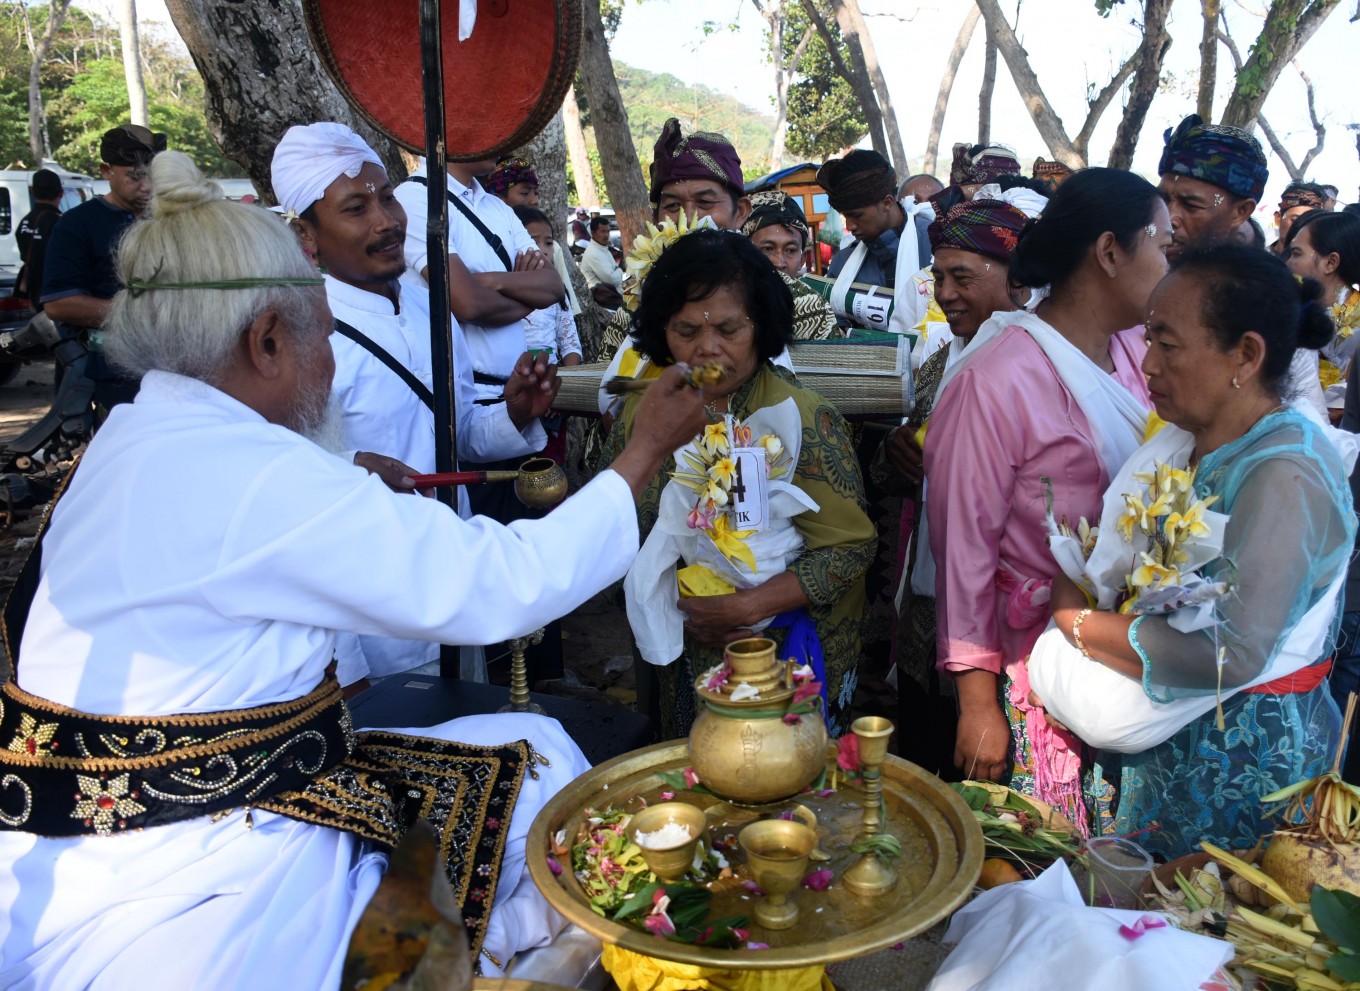 Malang's cremation ceremony welcomes members of different 